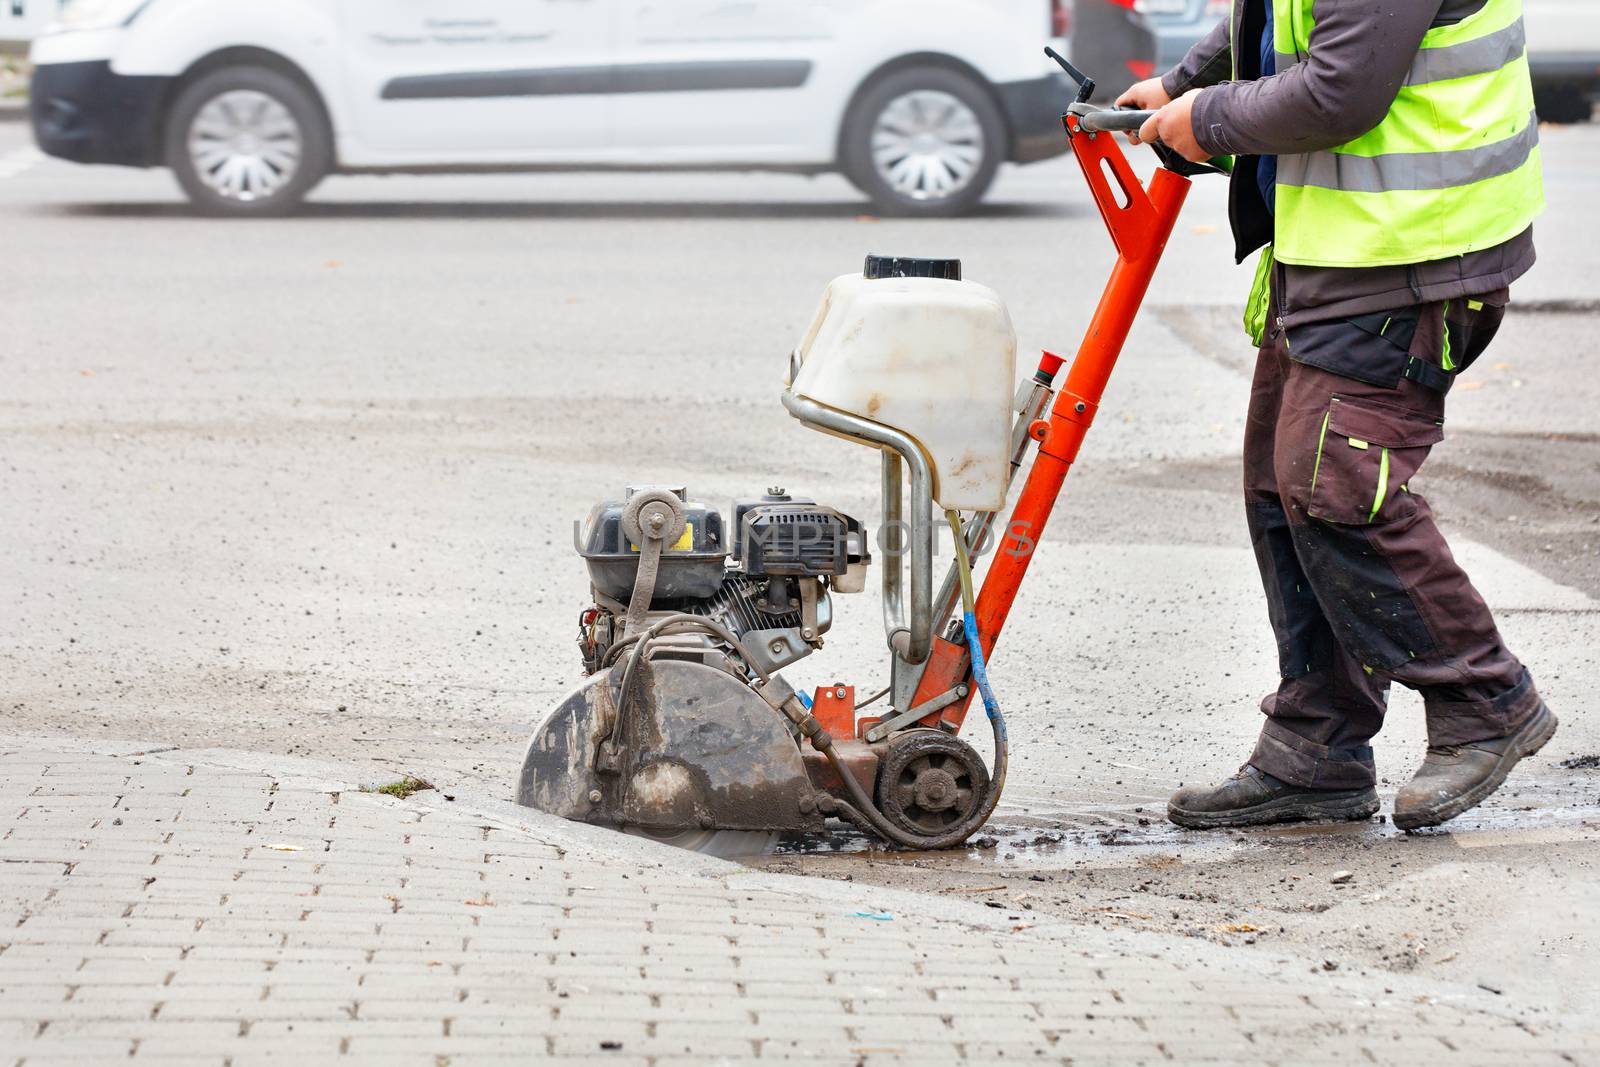 A road worker in a light green reflective vest cuts old asphalt with a petrol cutter on the road in front of a city street in a blurred form. Copy space.